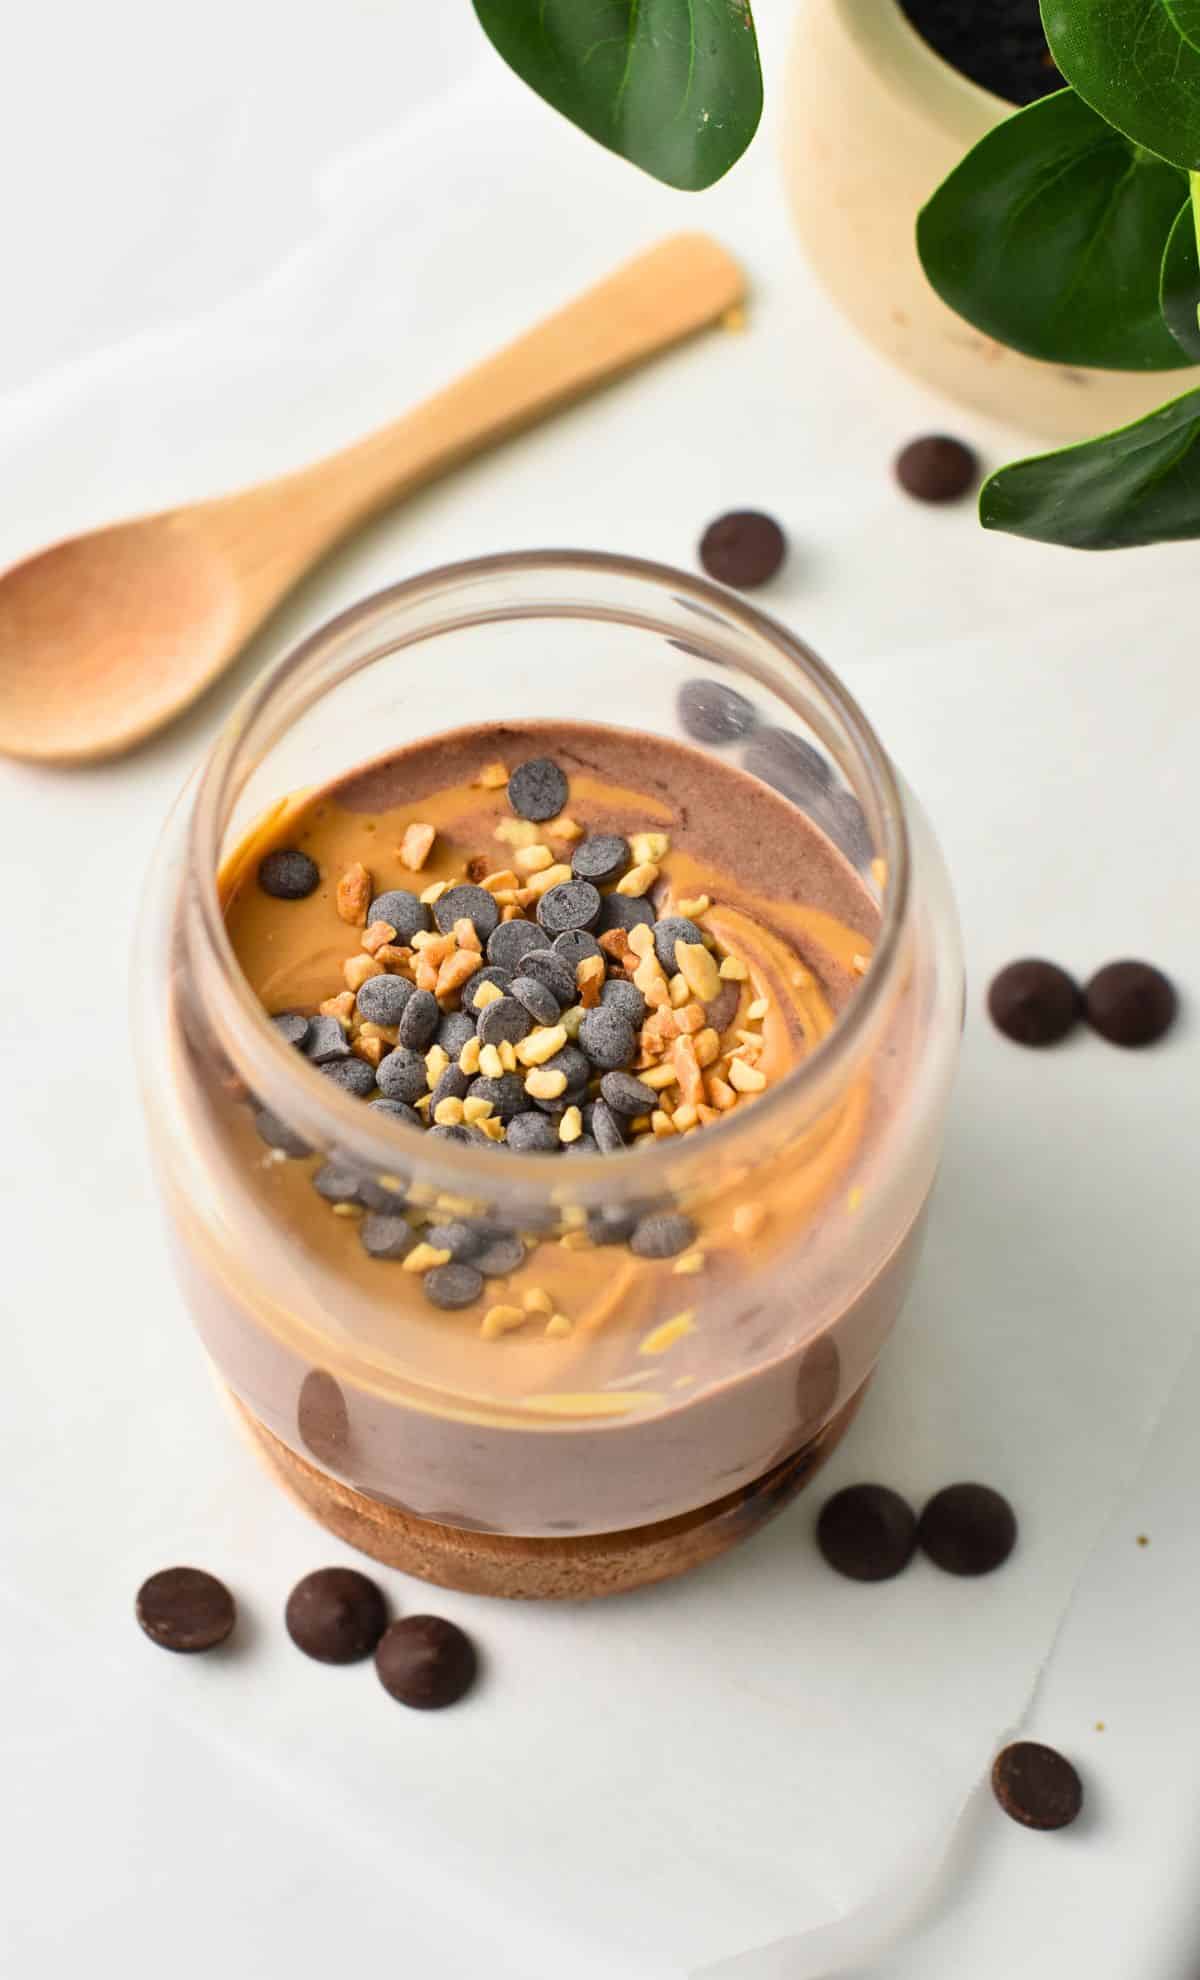 Chocolate Protein Yogurt in ajar with a wooden spoon.